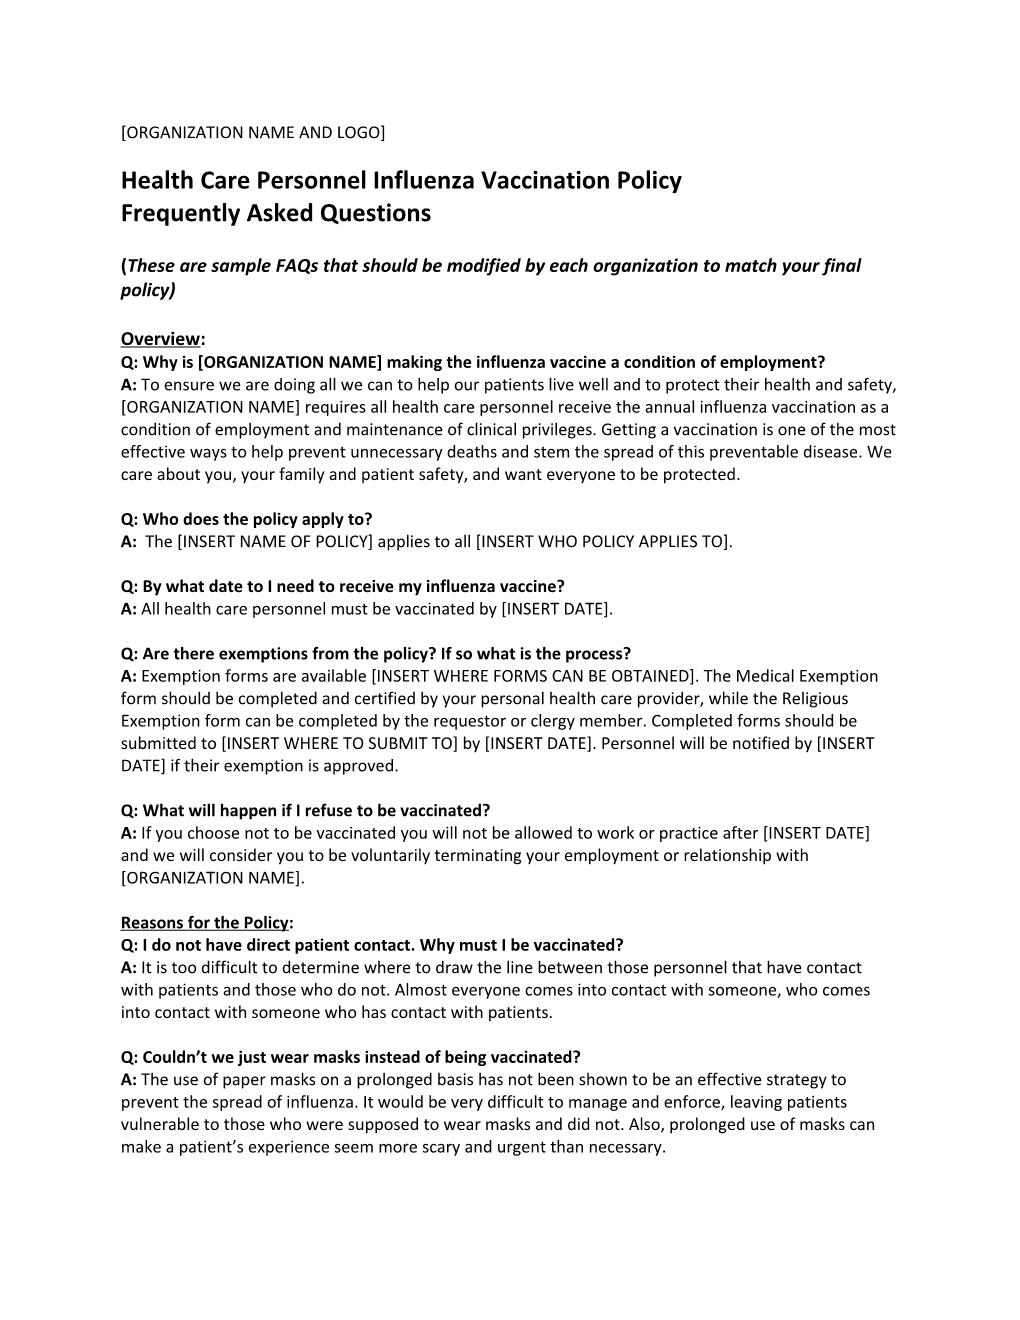 Health Care Personnel Influenza Vaccination Policy